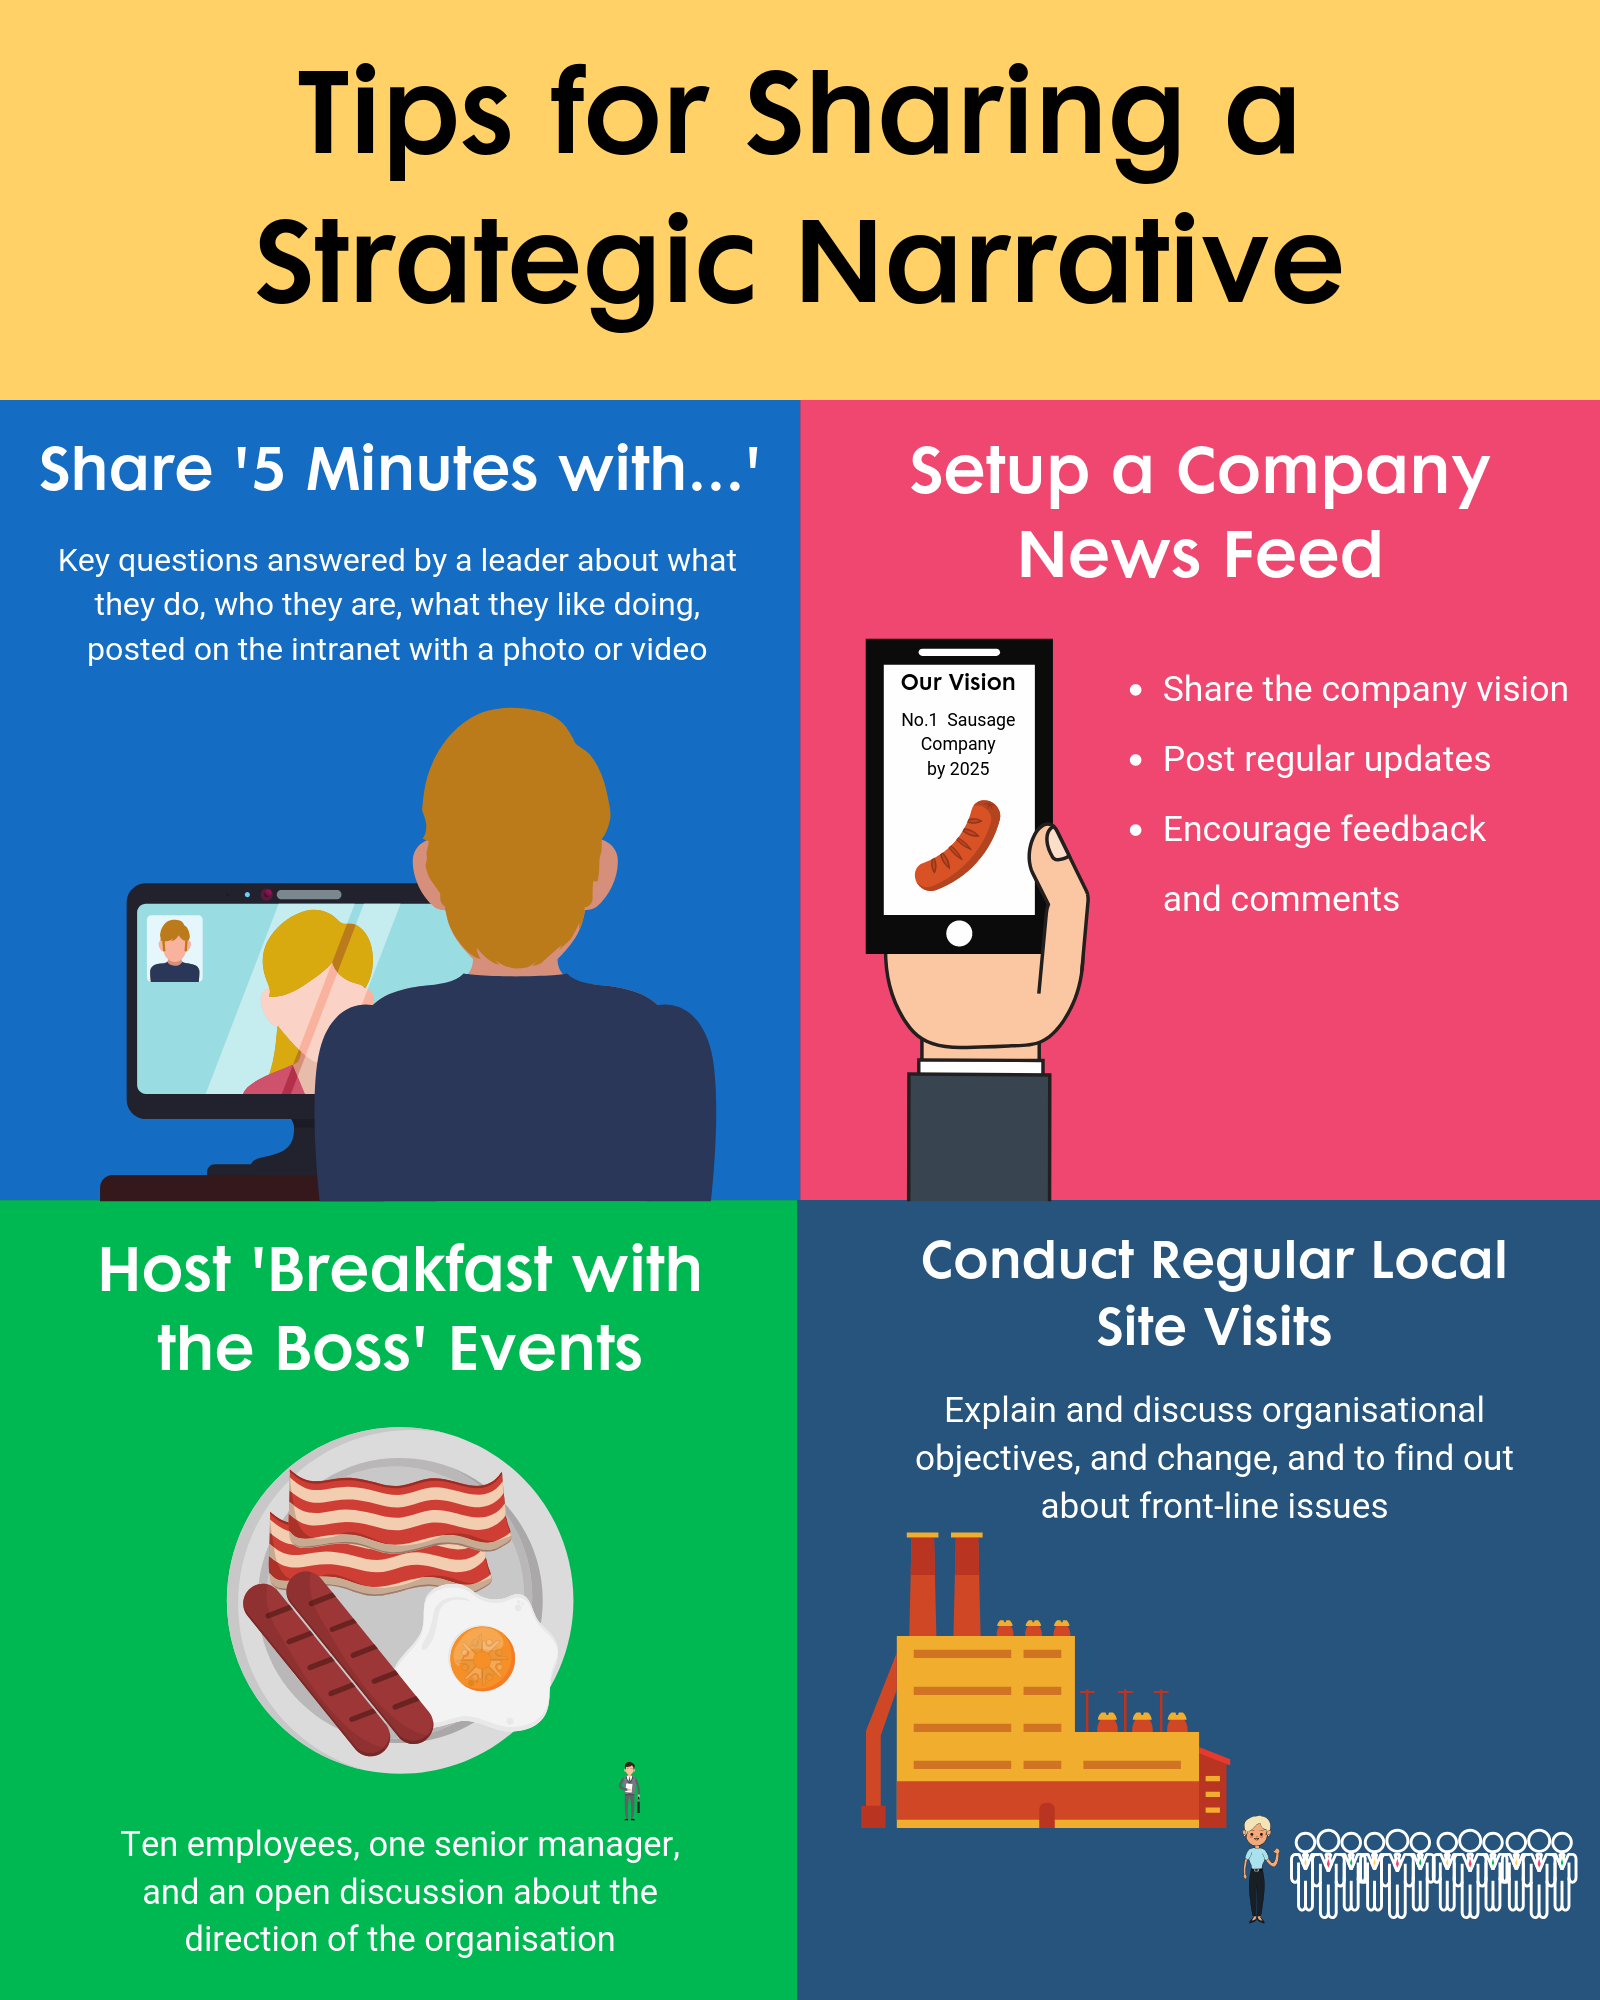 Tips for Sharing a Strategic Narrative for Better Employee Engagement